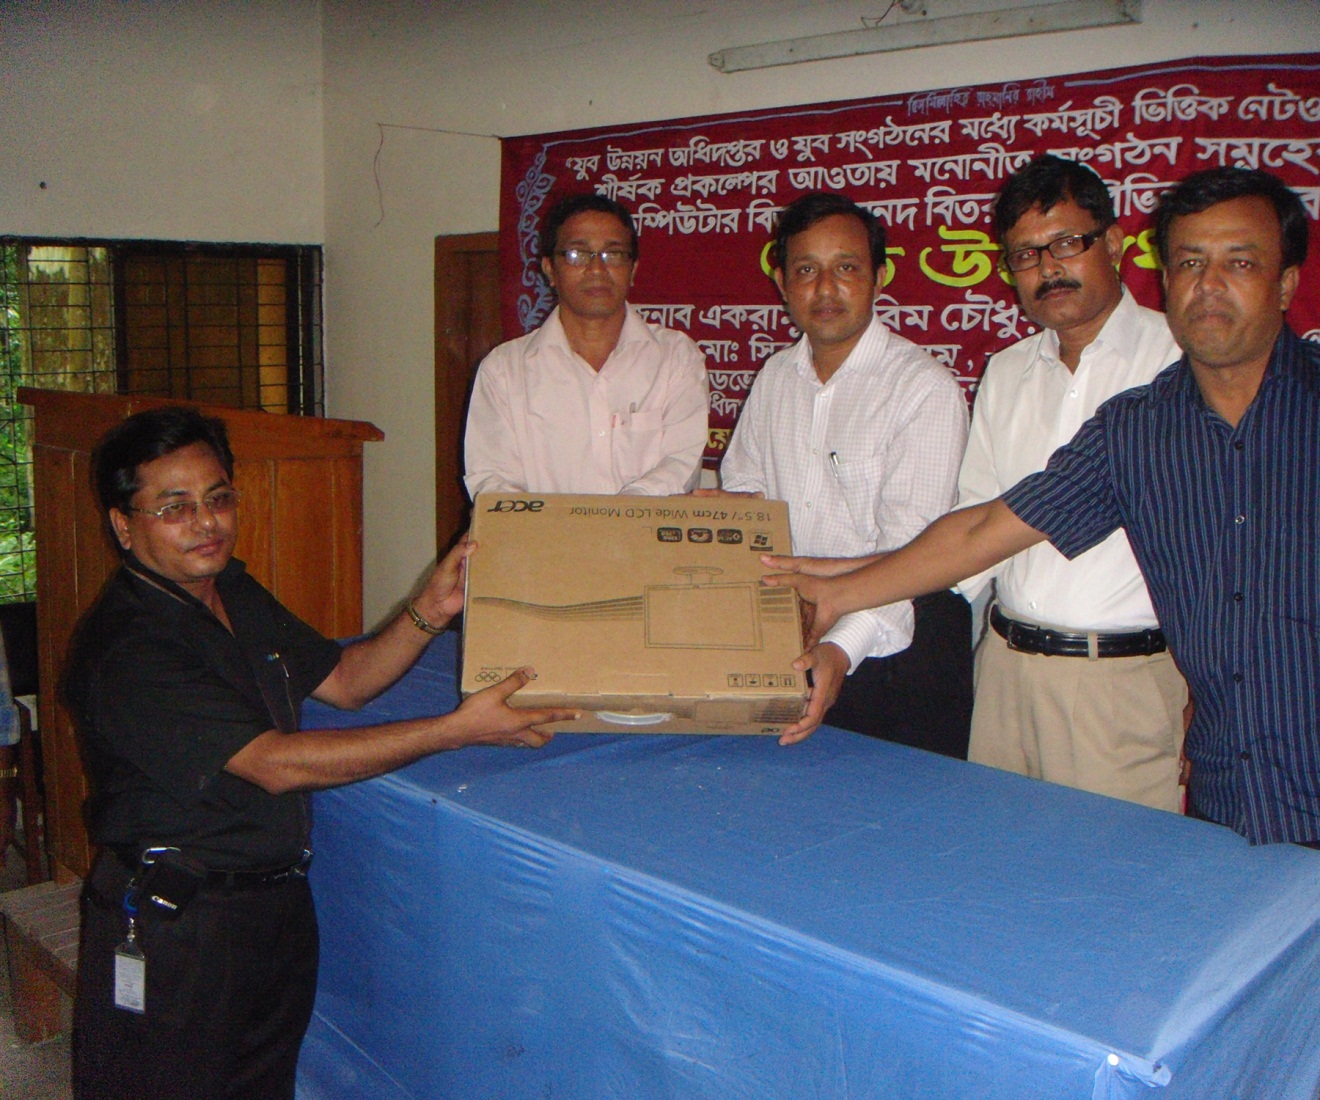 In the picture- Chairman of Begamganj-Sonaimuri Shikkha O Sastha Unnayan Foundation and Principal, Begumganj Technical & Computer Institute Md. Giash Uddin Mithu received a computer and other furniture as grant under the Noakhali Youth Development Department under the Network Project. Deputy director Forhad Noor including other officers were present.